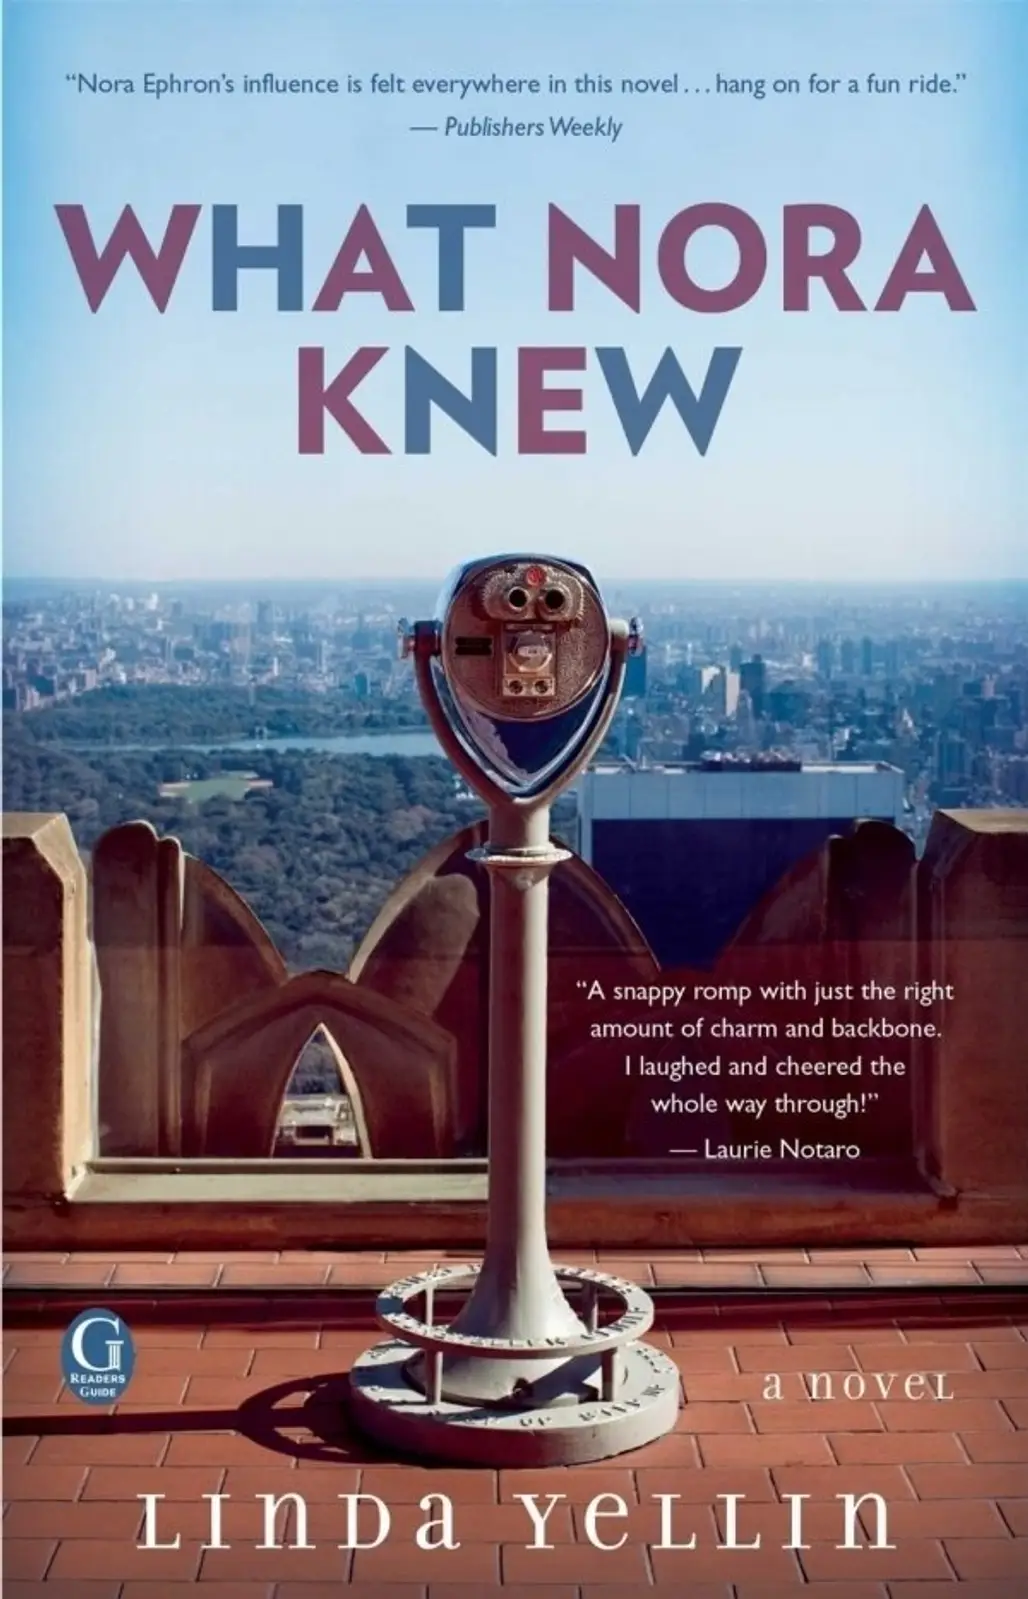 What Nora Knew by Linda Yellin